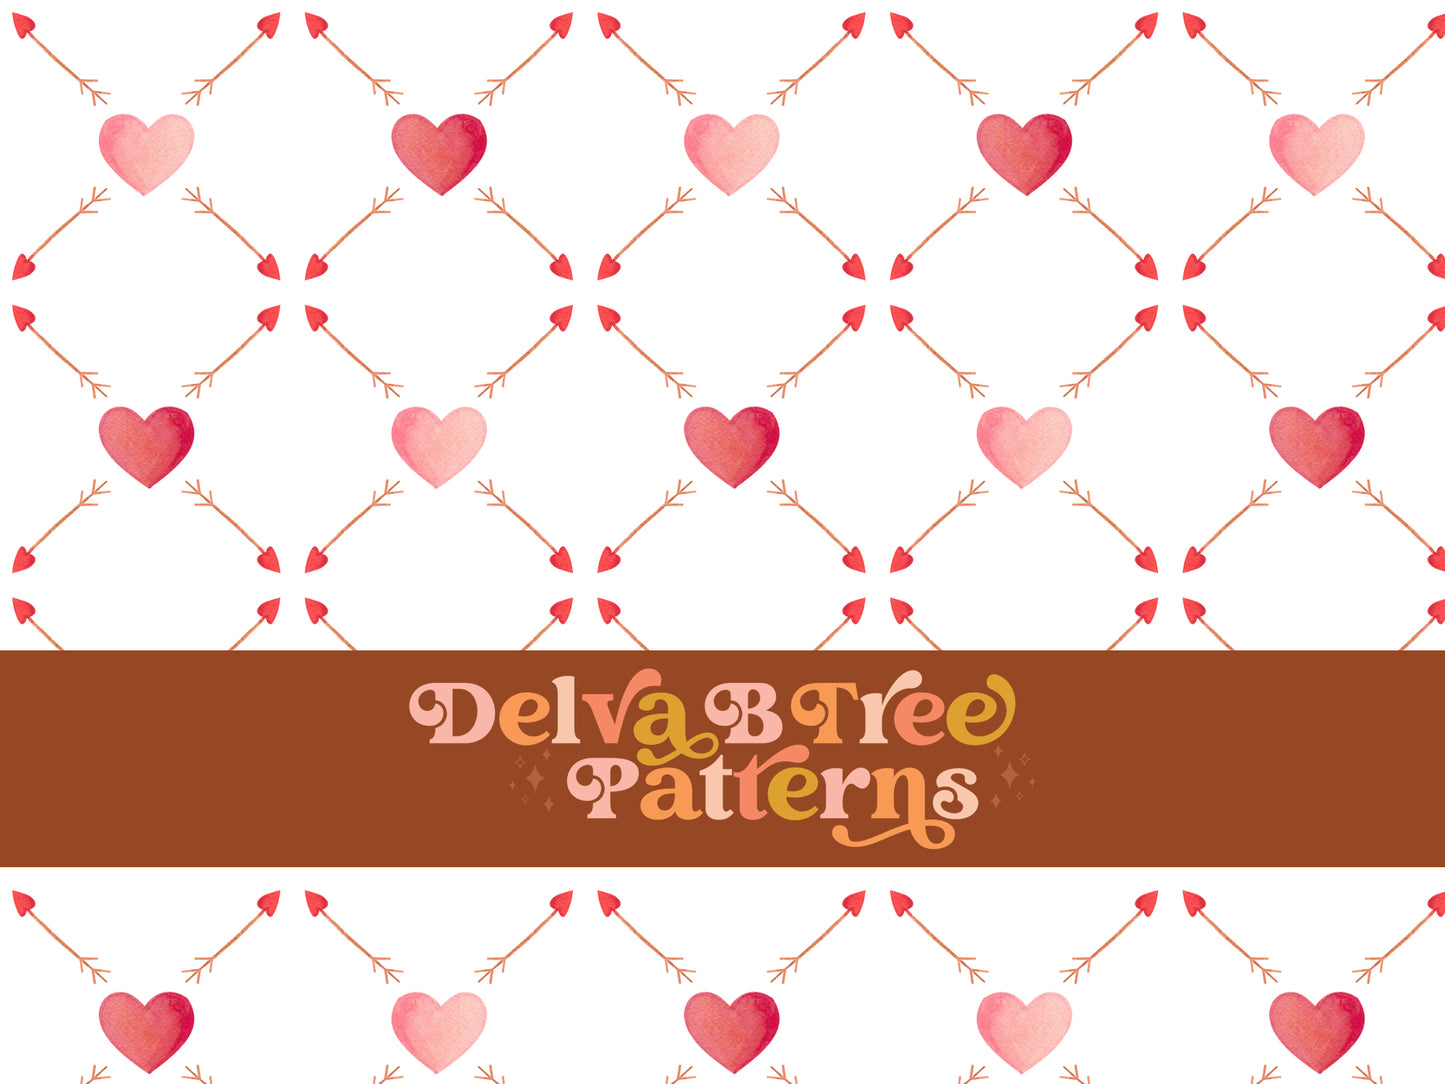 Watercolor pink hearts, red hearts and brown arrows seamless file for fabric printing. Valentines Day Repeat Pattern for textiles, polymailers, baby boy lovey blankets, nursery crib bedding, kids clothing, girls hair accessories, home decor accents, pet products.